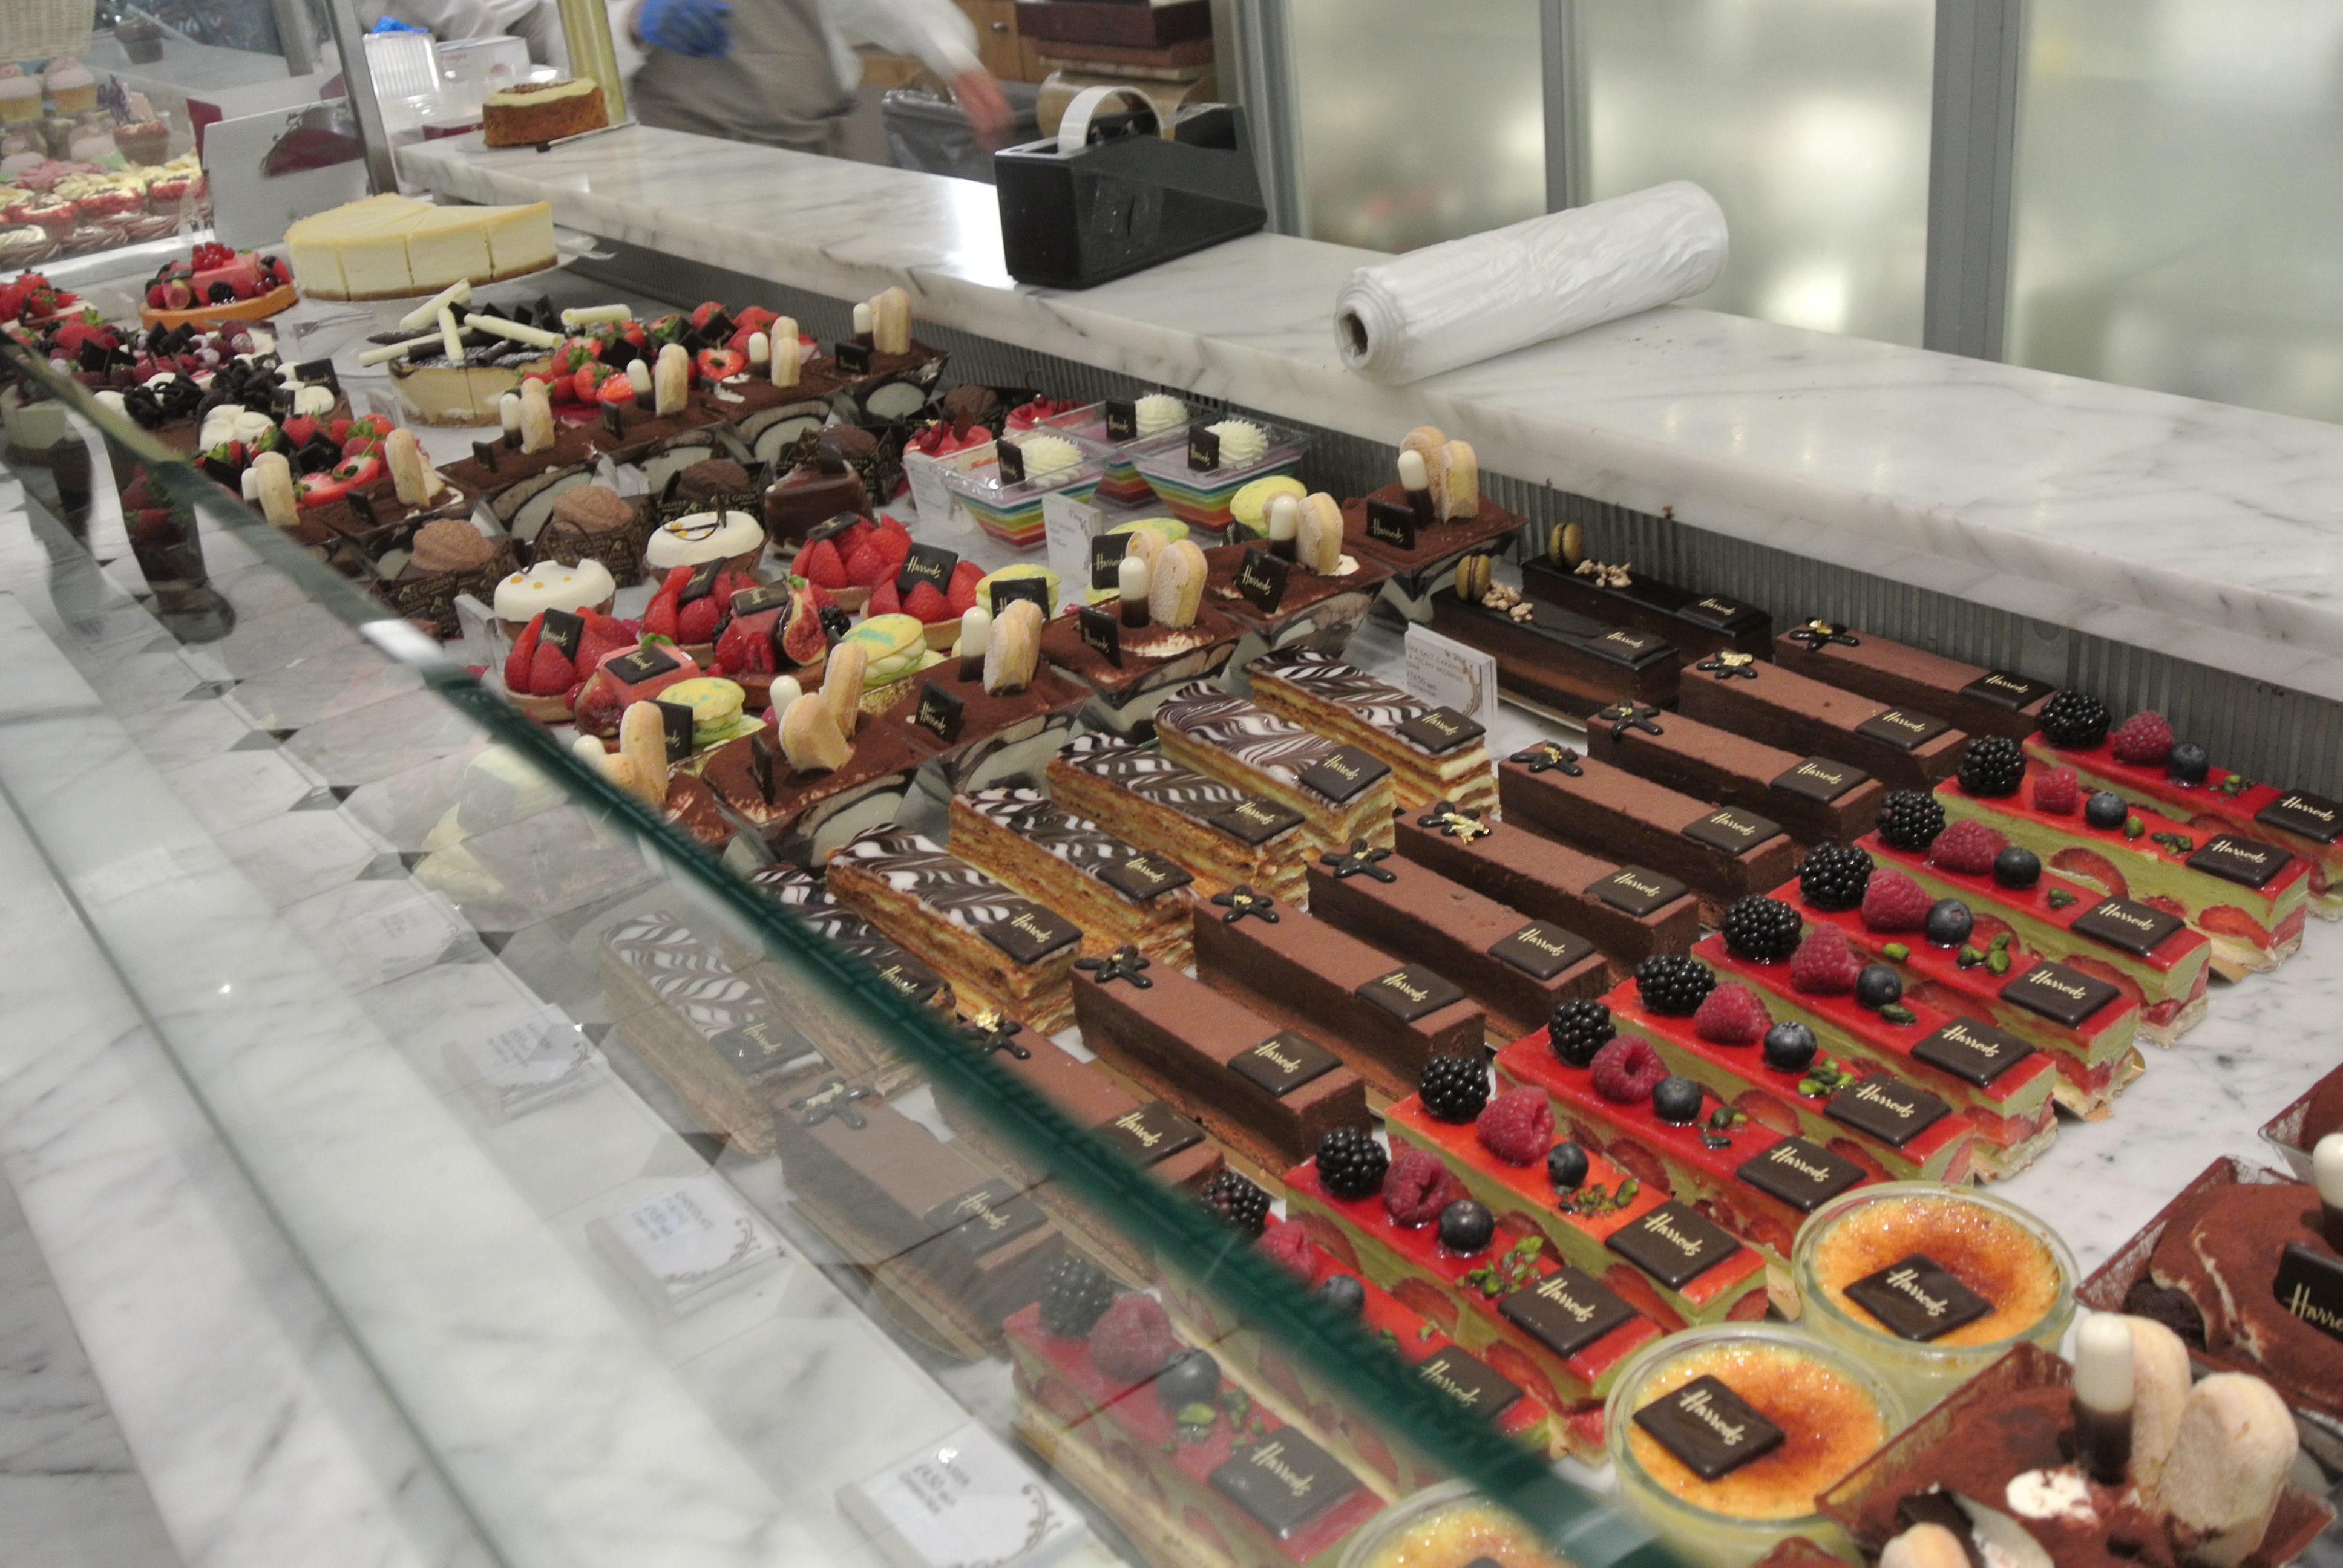 An entire row of beautiful pastries so perfectly laid out.